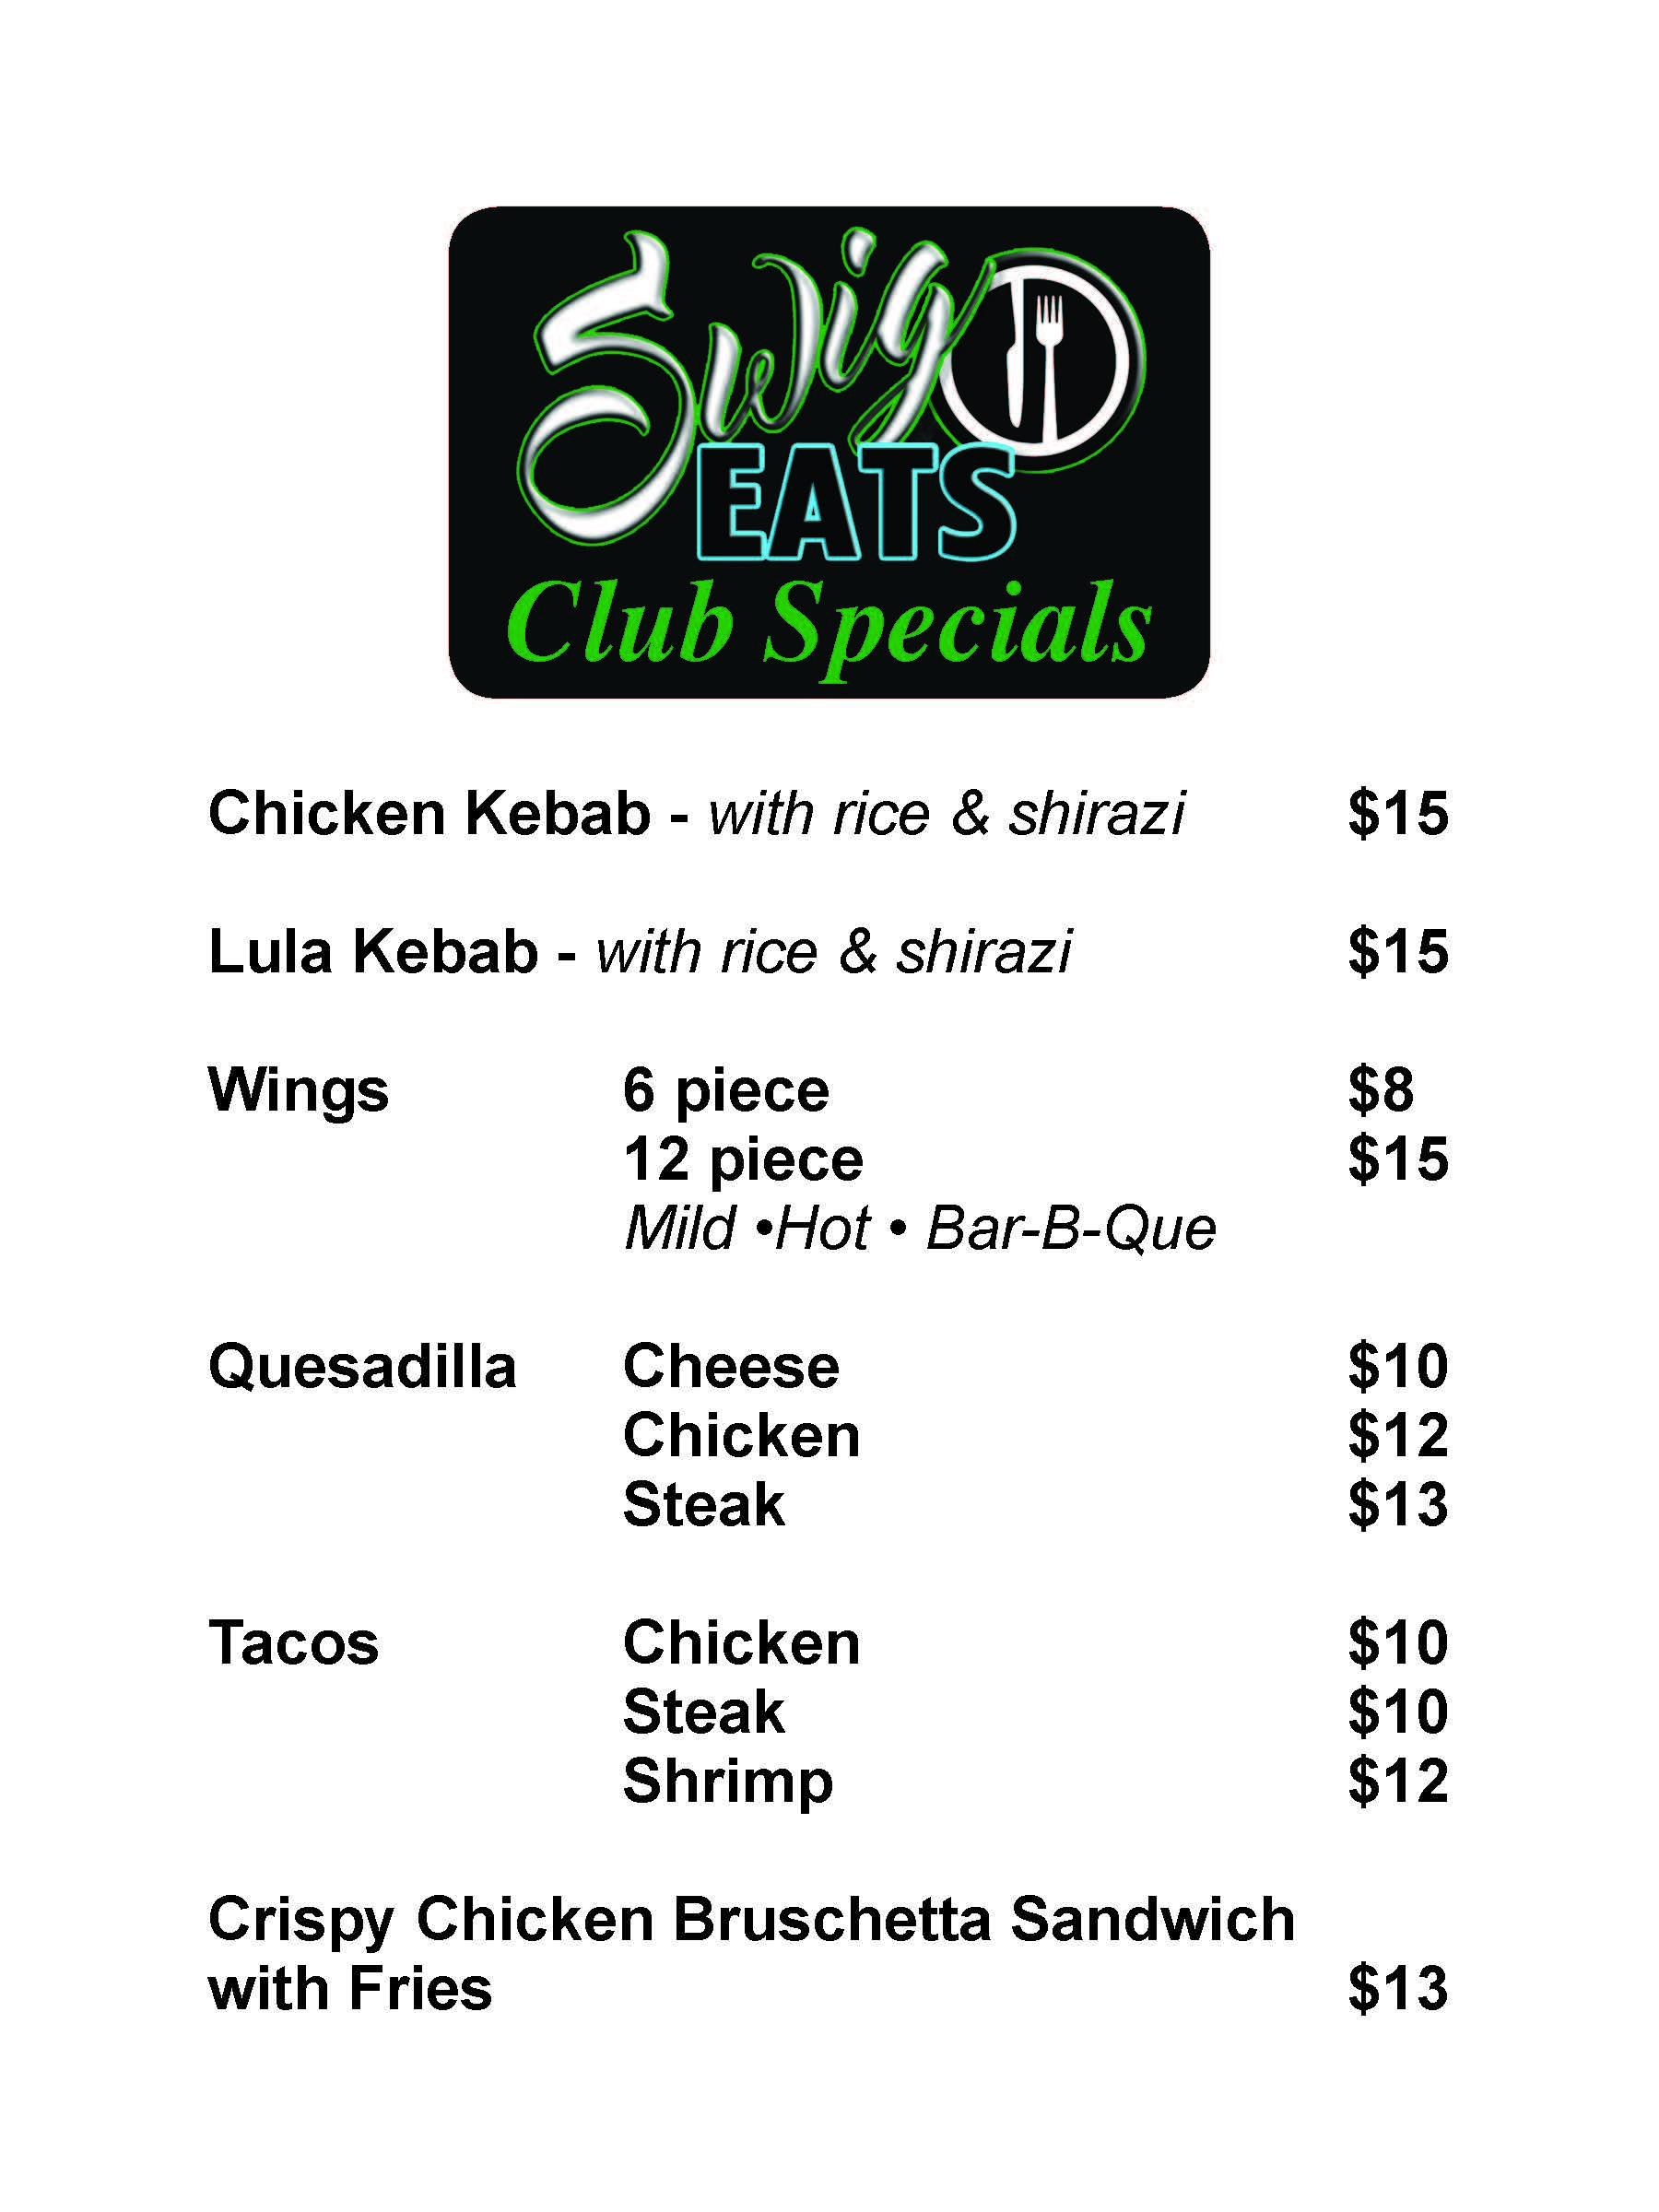 Menu for Swig Eats Club Specials including various kebabs, wings, quesadillas, tacos, and a Crispy Chicken Bruschetta Sandwich. Prices range from $8 to $15.